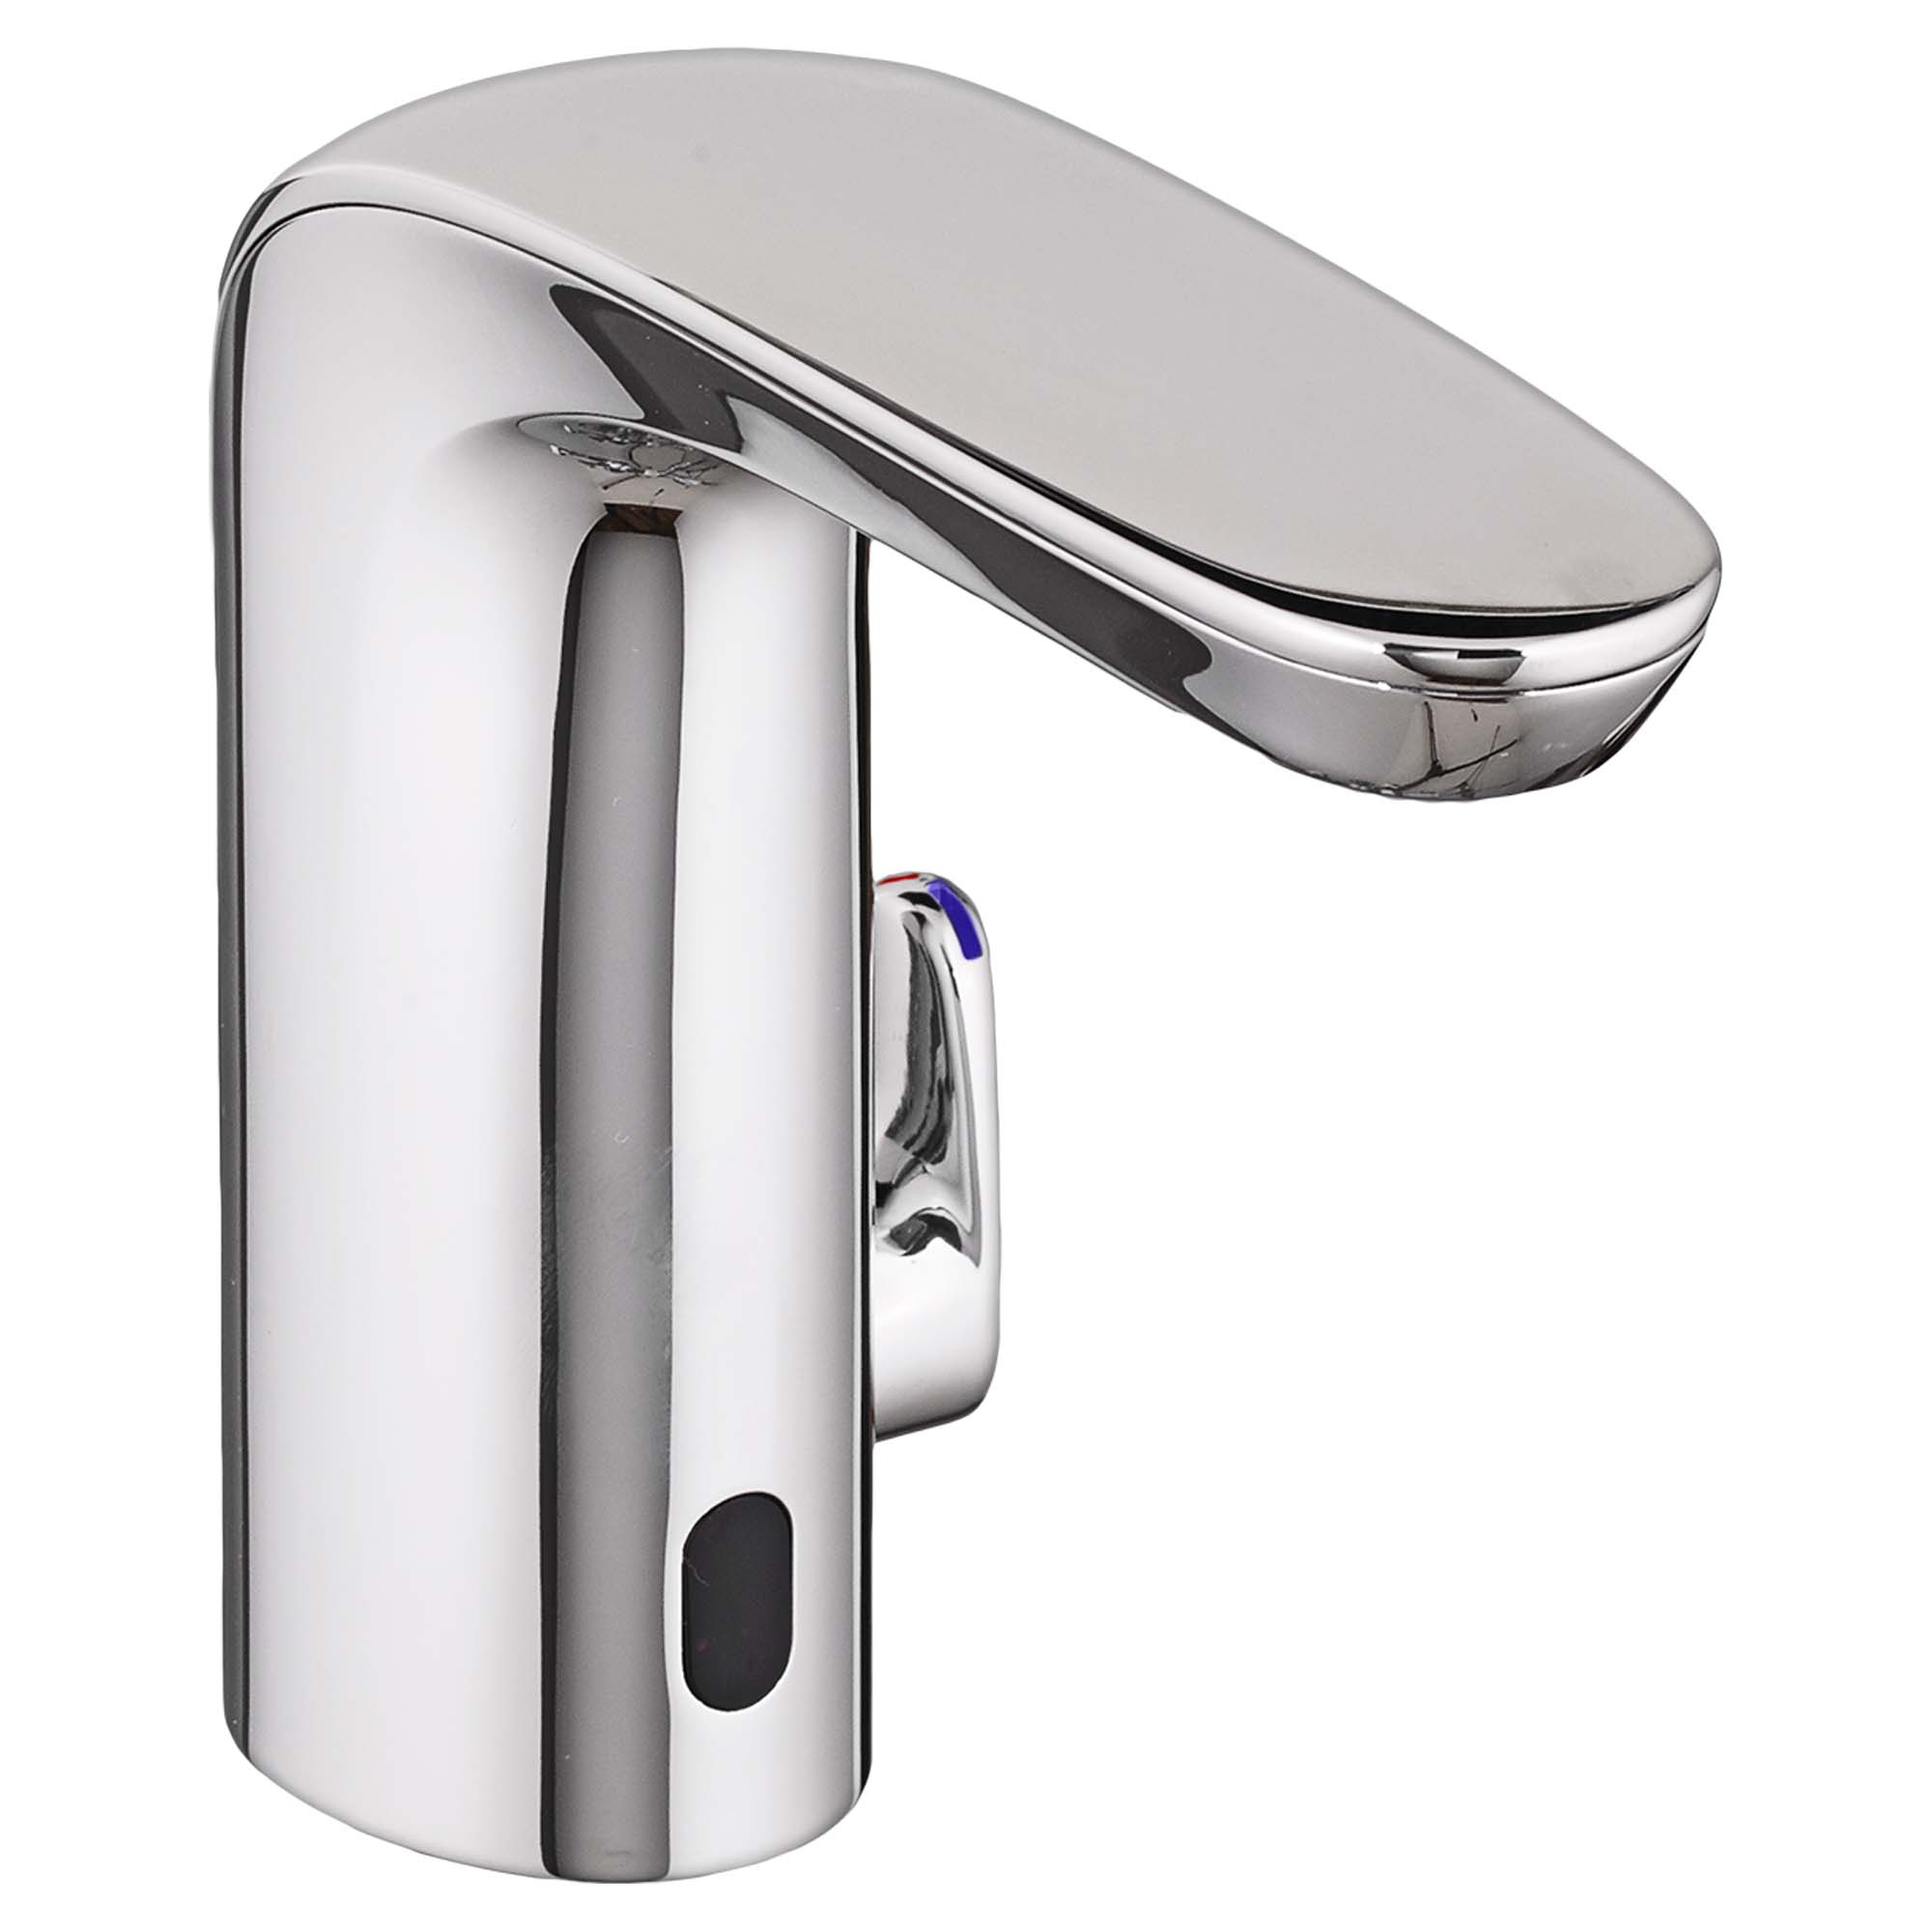 NextGen Selectronic® Touchless Faucet, Base Model With SmarTherm Safety Shut-Off + ADM, 0.35 gpm/1.3 Lpm